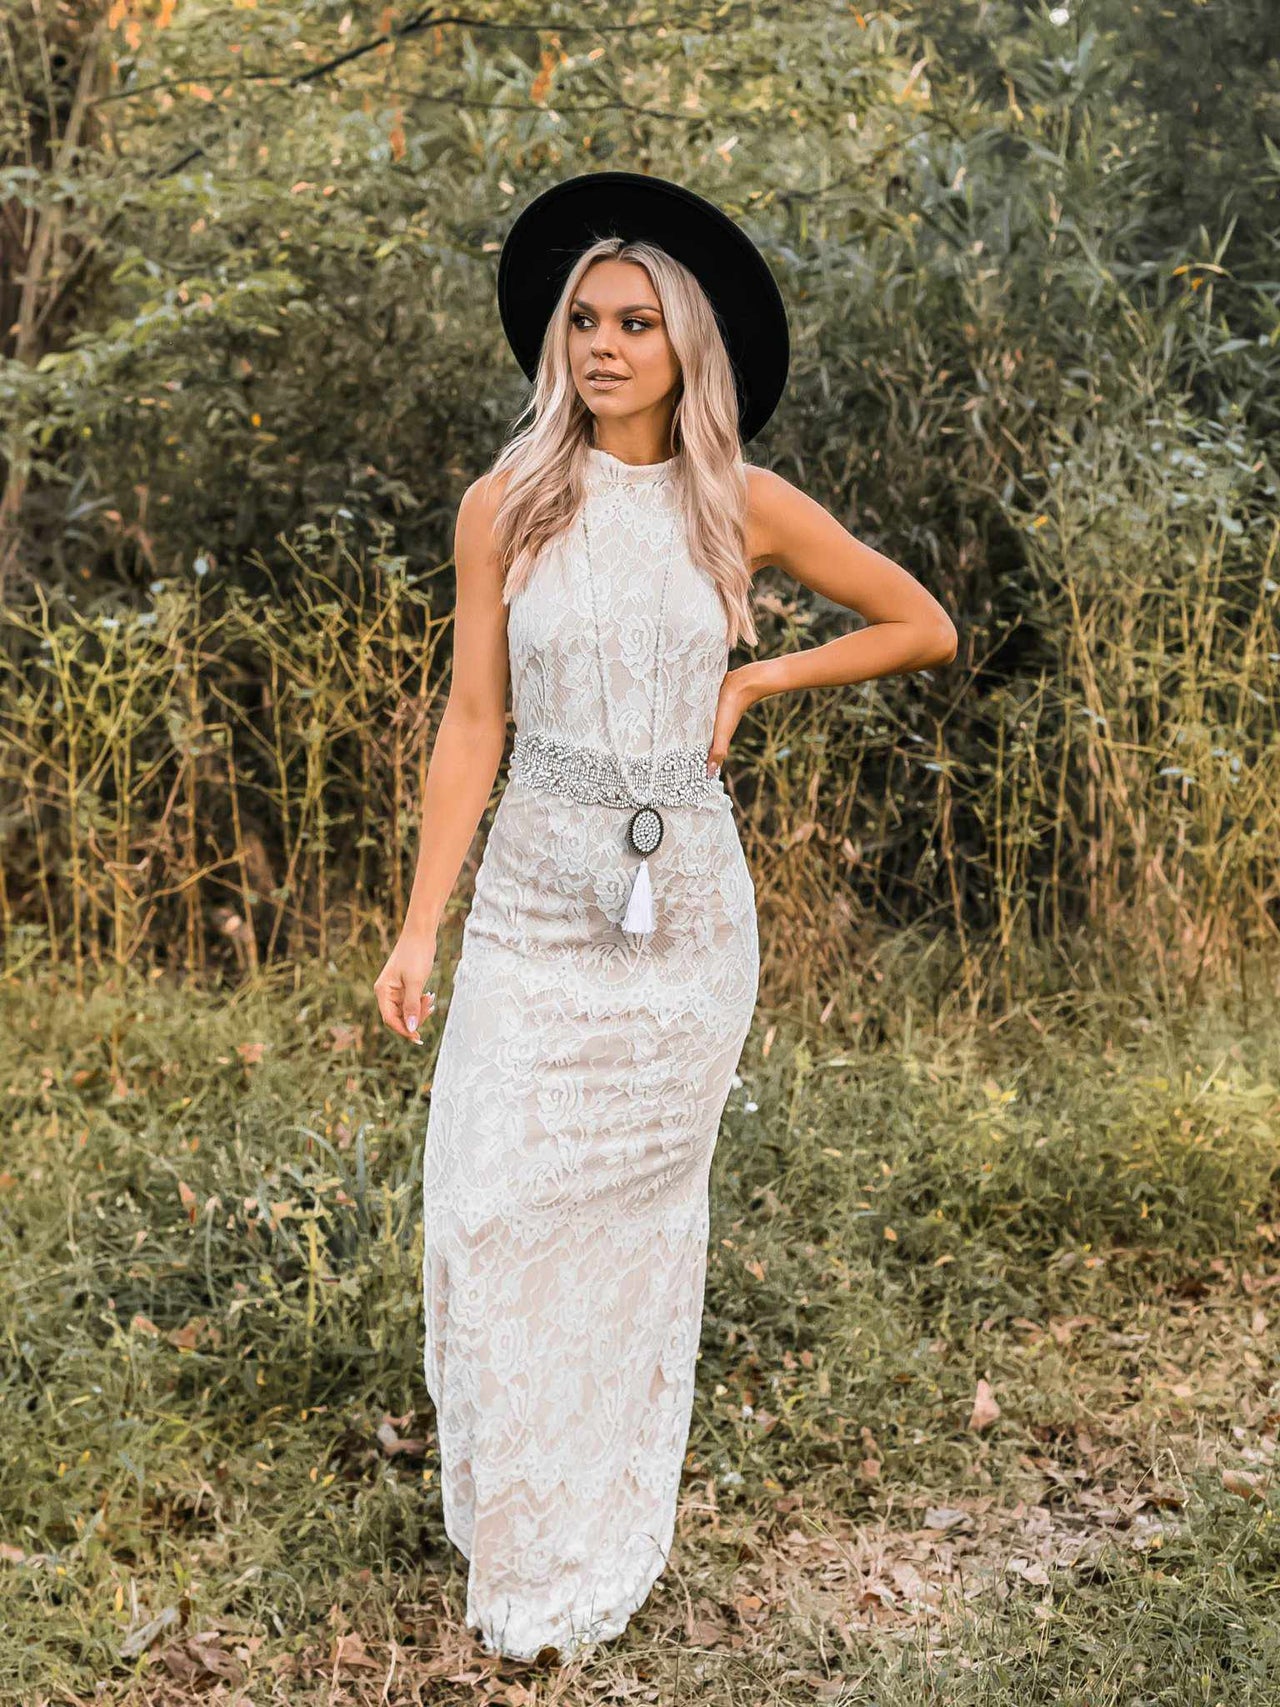 To Have and To Hold Lace Dress - Ivory-Dresses-Southern Fried Chics